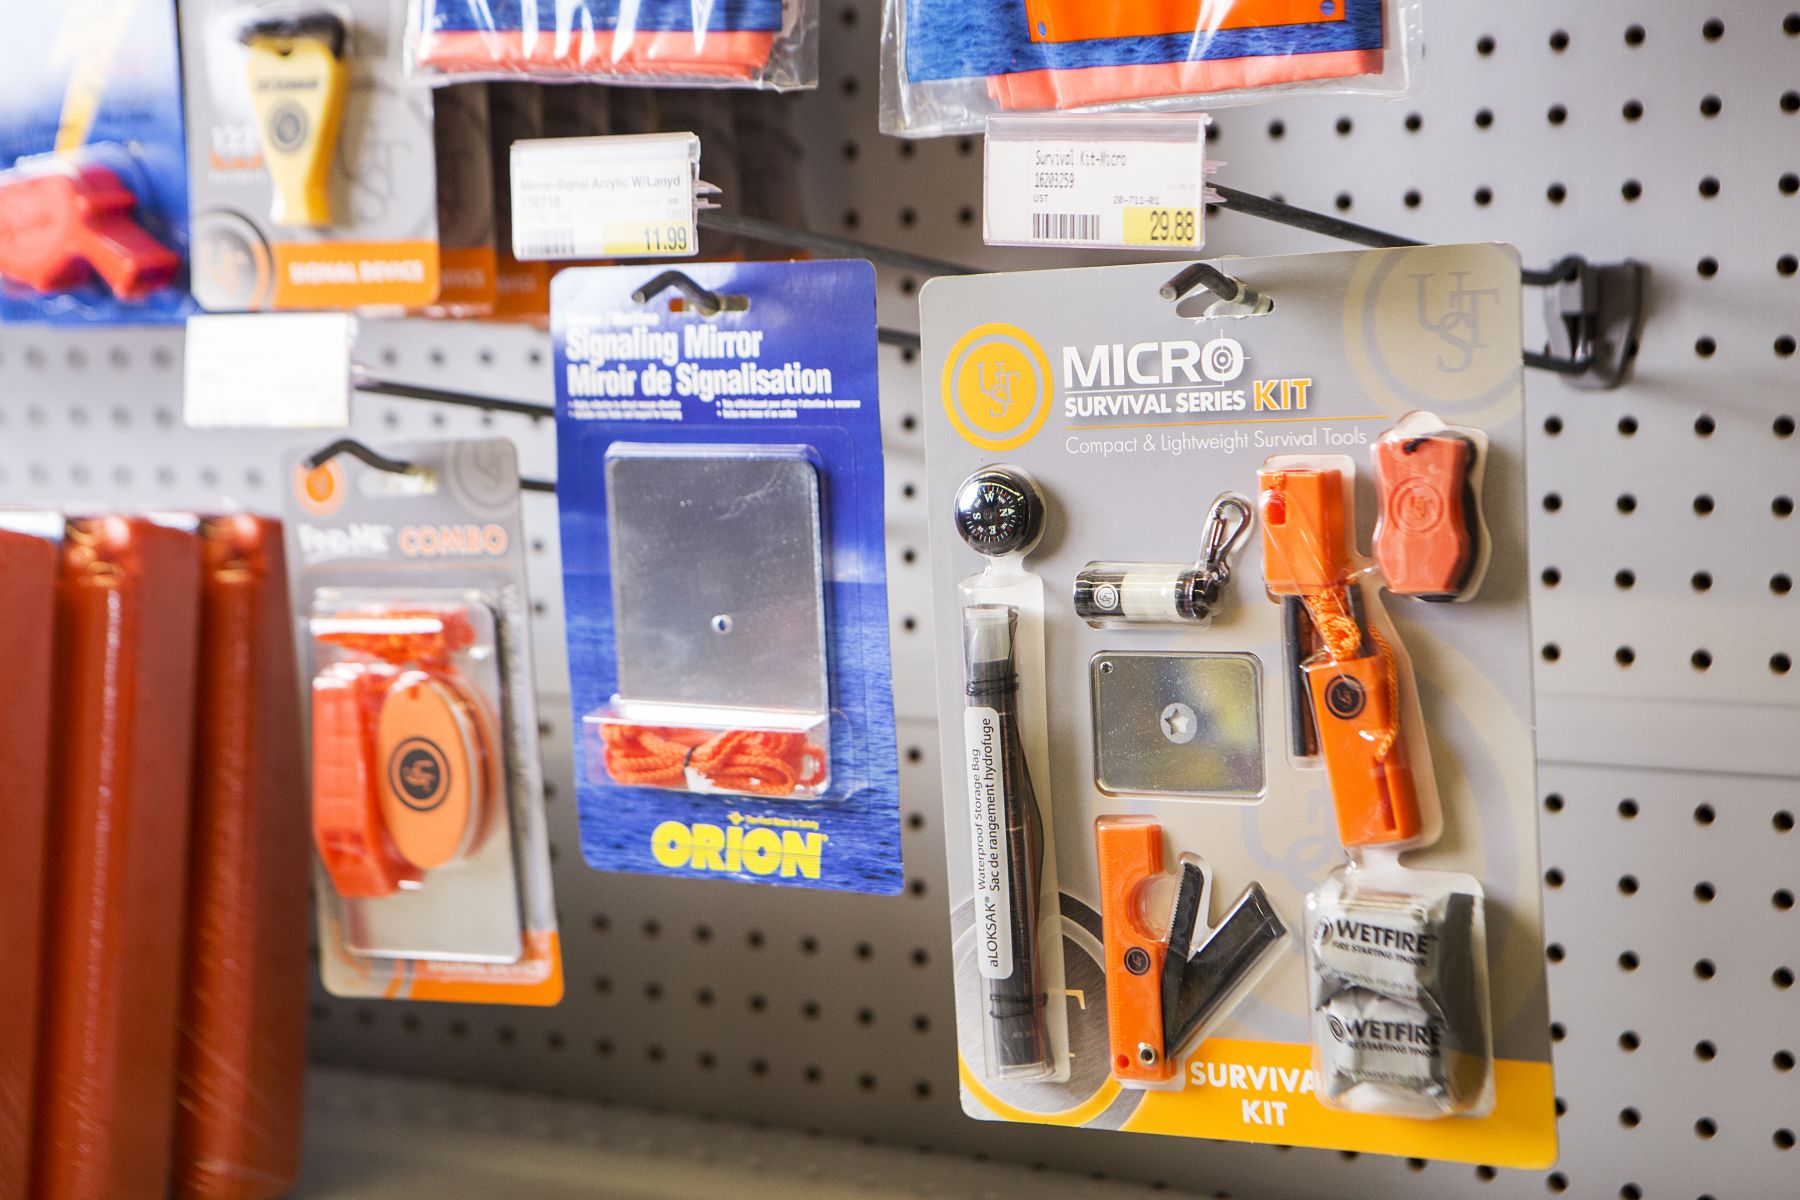 Signaling mirrors and other safety equipment on the shelves at a retail outlet.